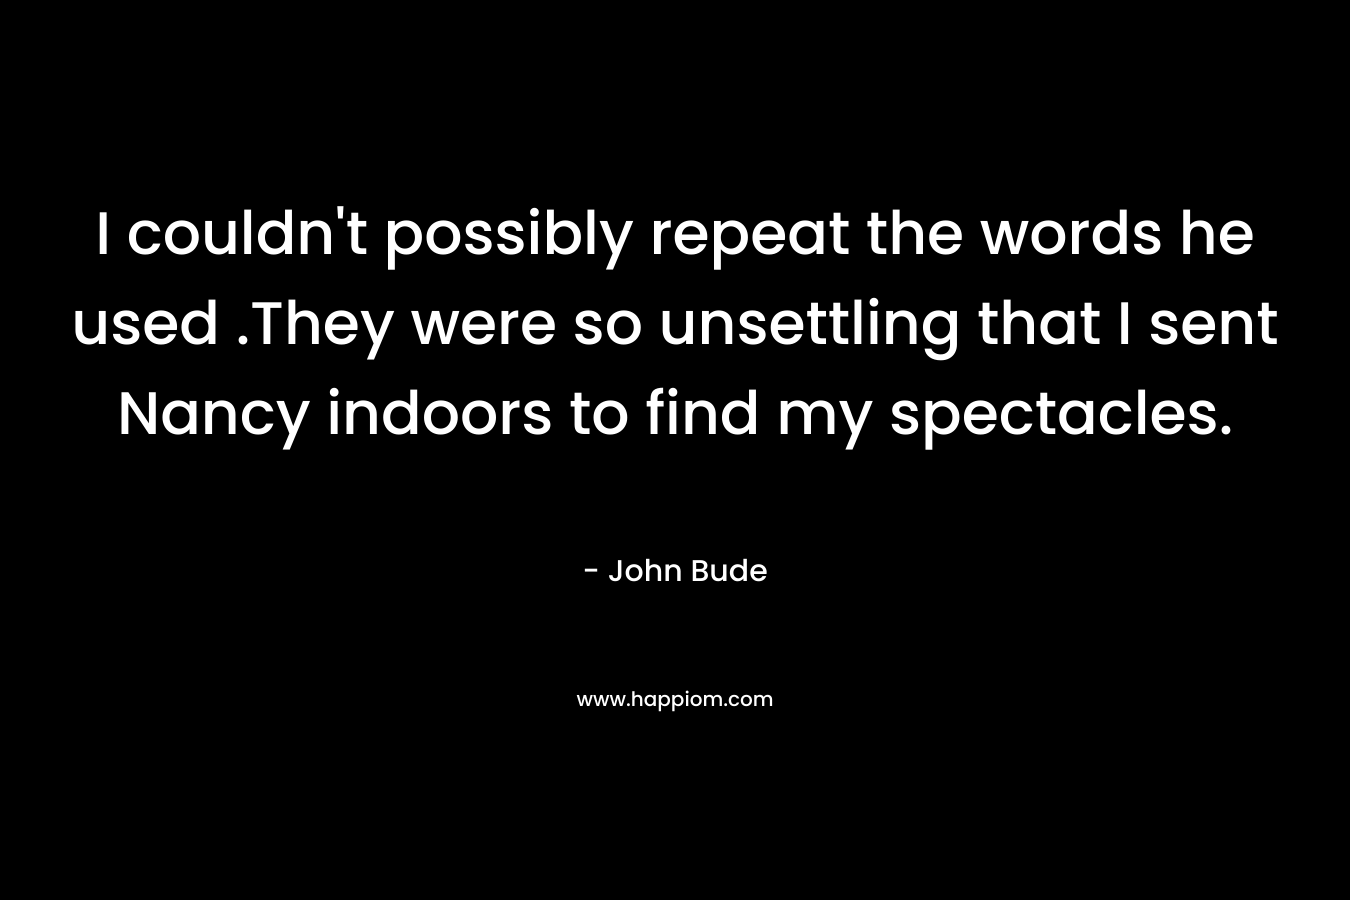 I couldn’t possibly repeat the words he used .They were so unsettling that I sent Nancy indoors to find my spectacles. – John Bude